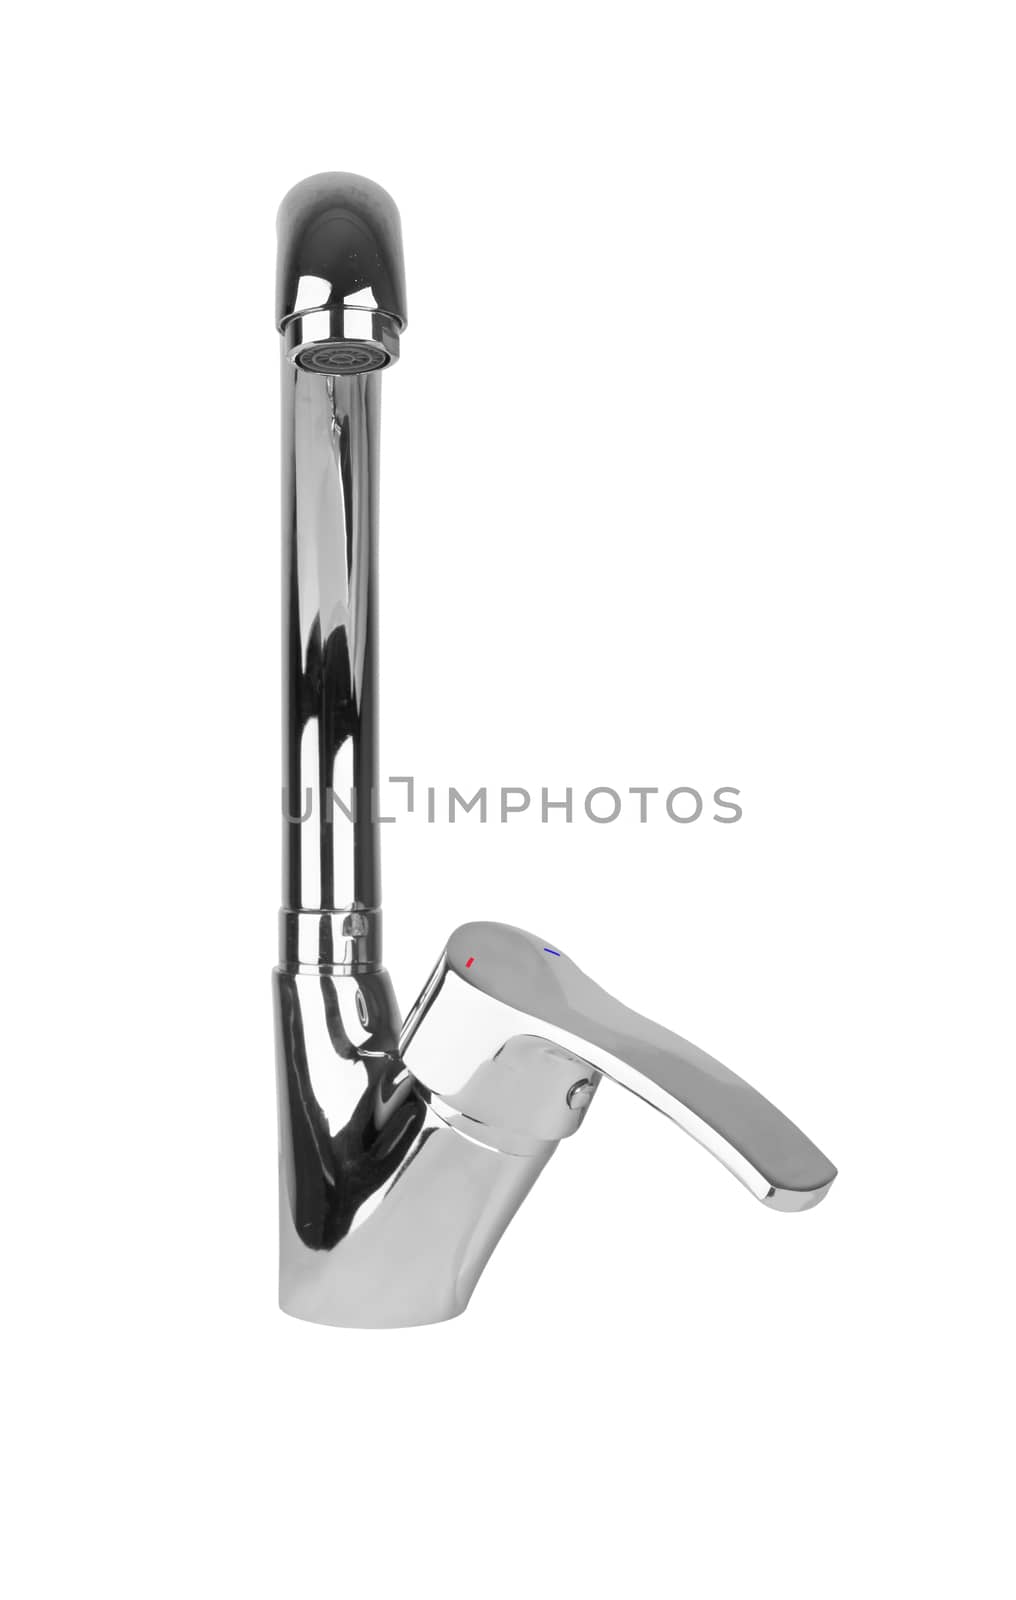 Stainless steel tap isolated on white background.